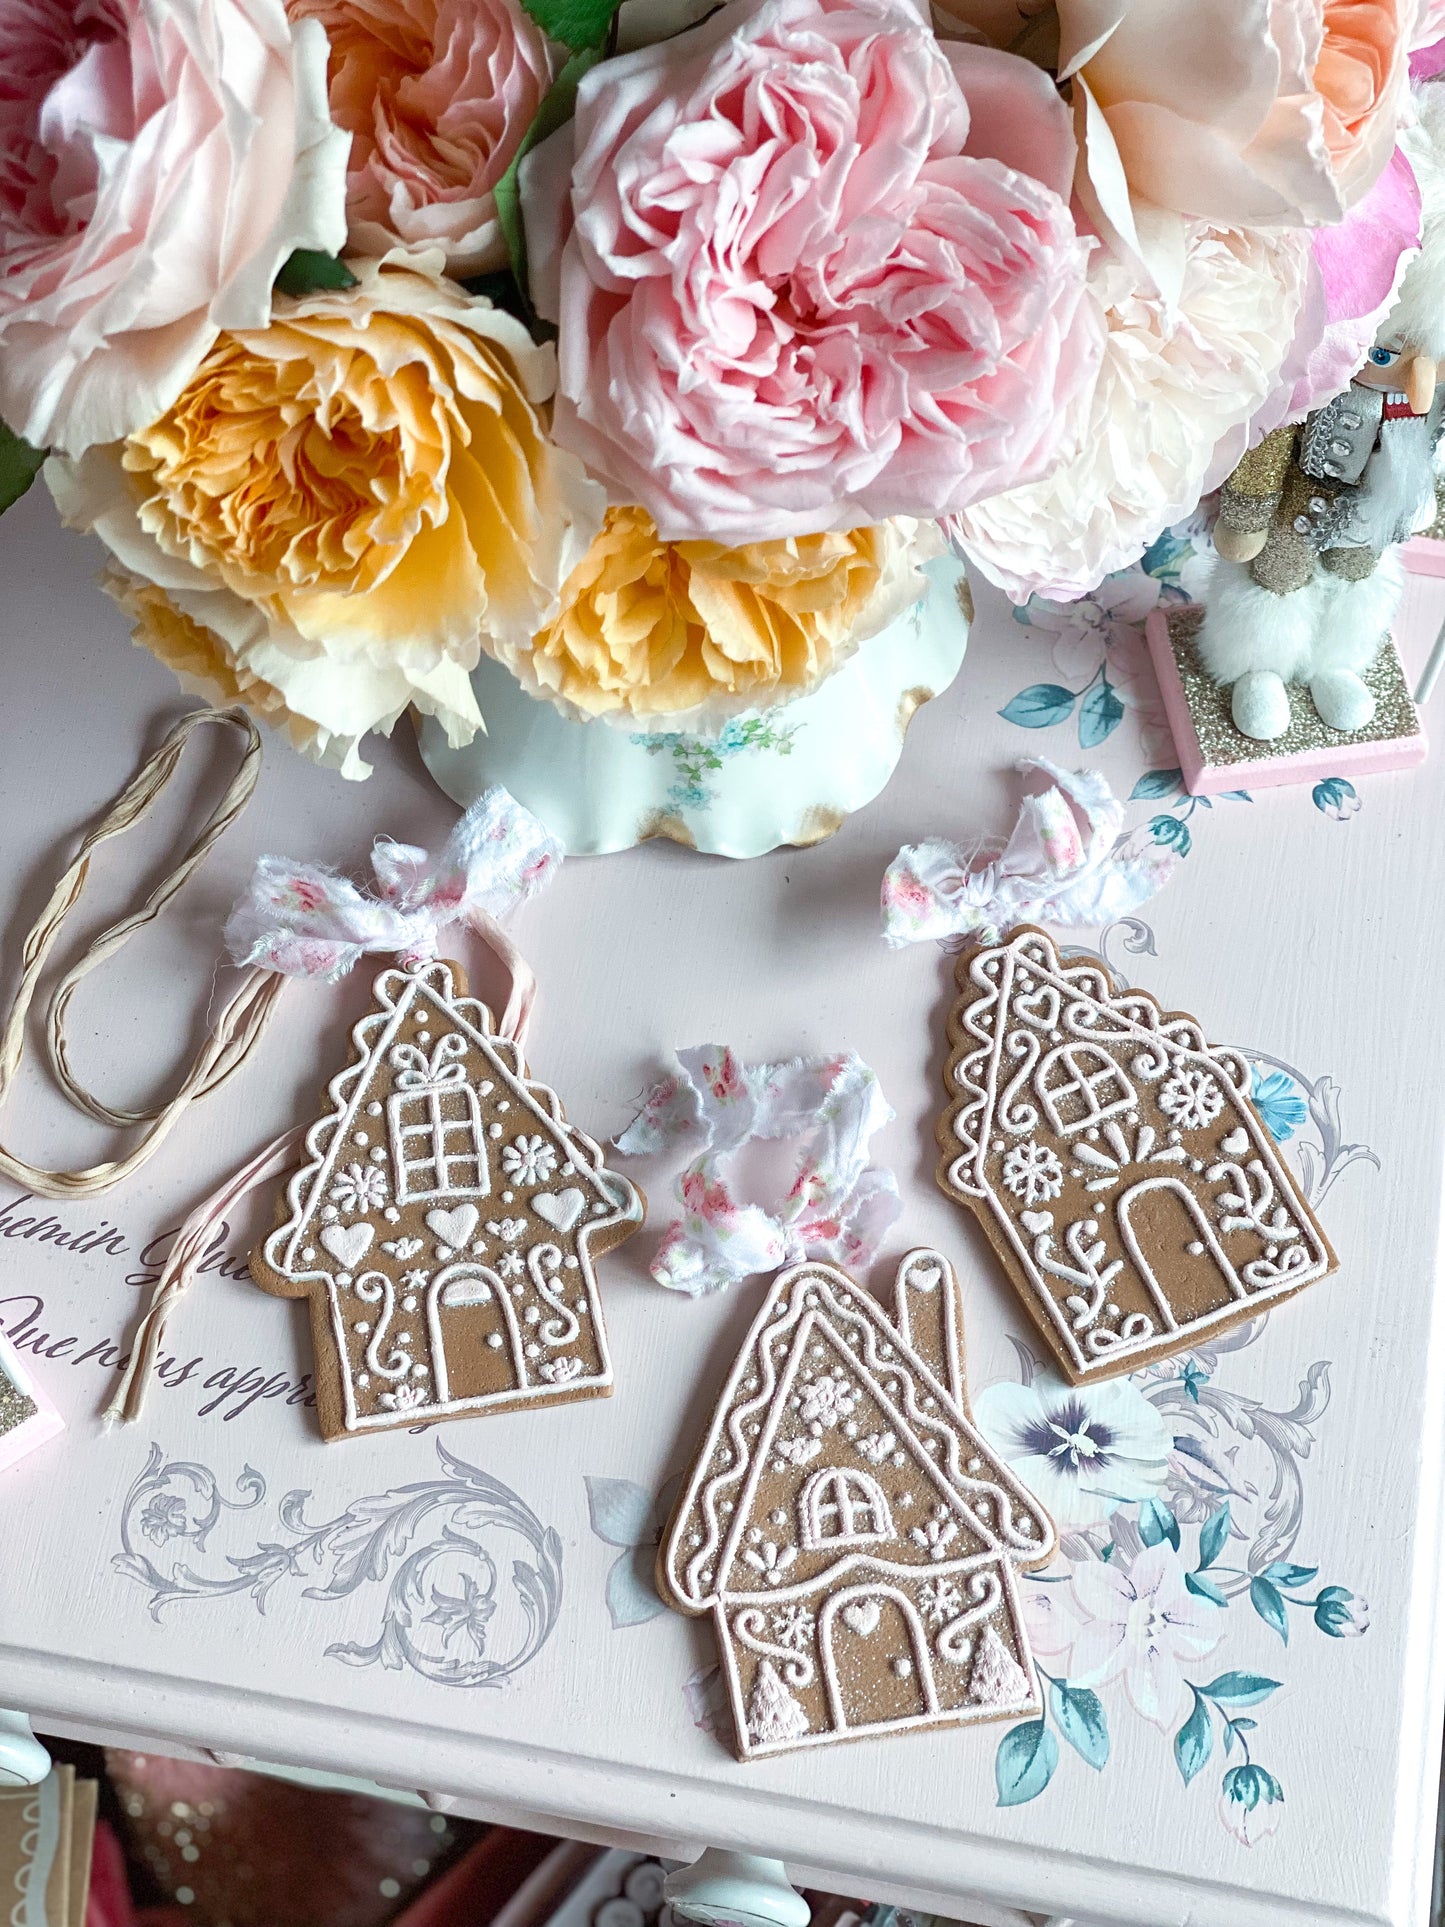 Gingerbread House Ornaments